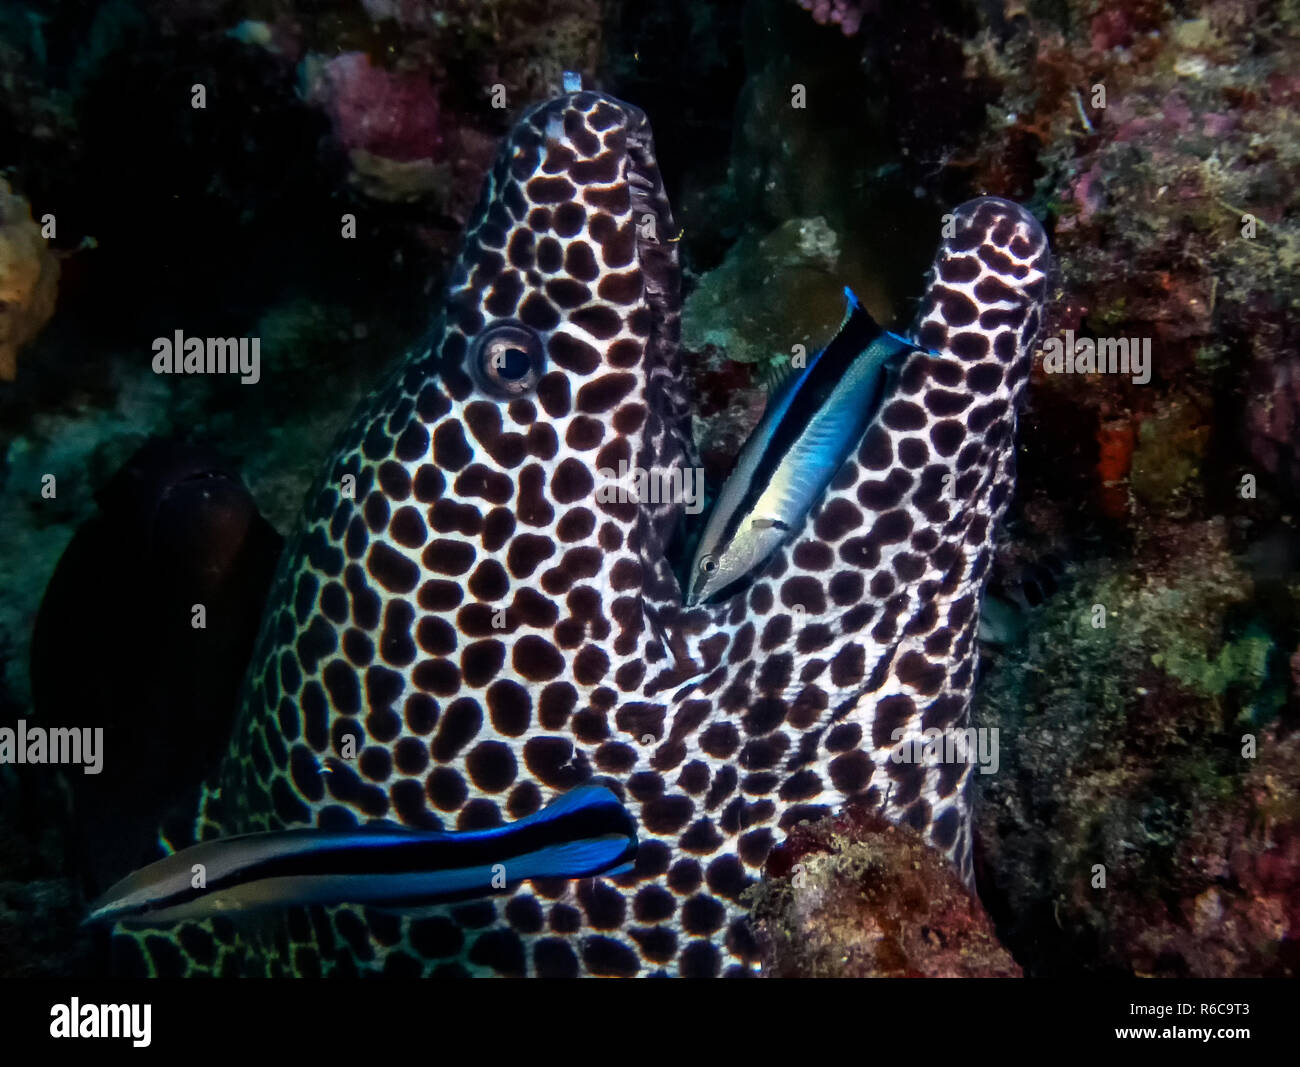 A Honeycomb Moray (Gymnothorax favagineus) being attended to by a Bluestreak Cleaner Wrasse (Labroides dimidiatus) in the Indian Ocean Stock Photo